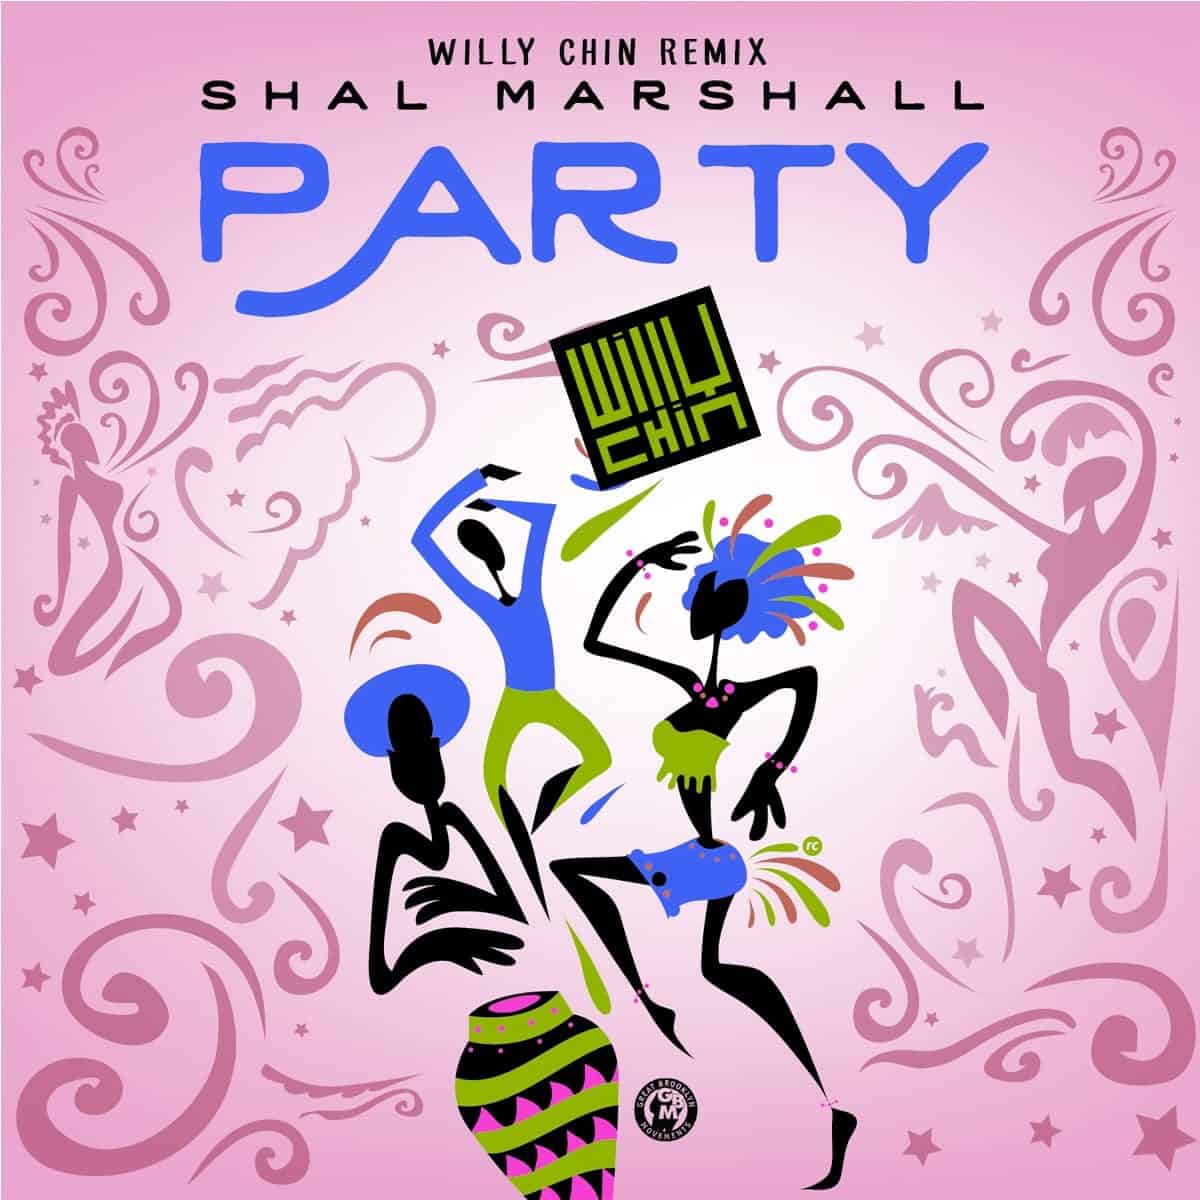 Shal Marshall - Party - Willy Chin Remix